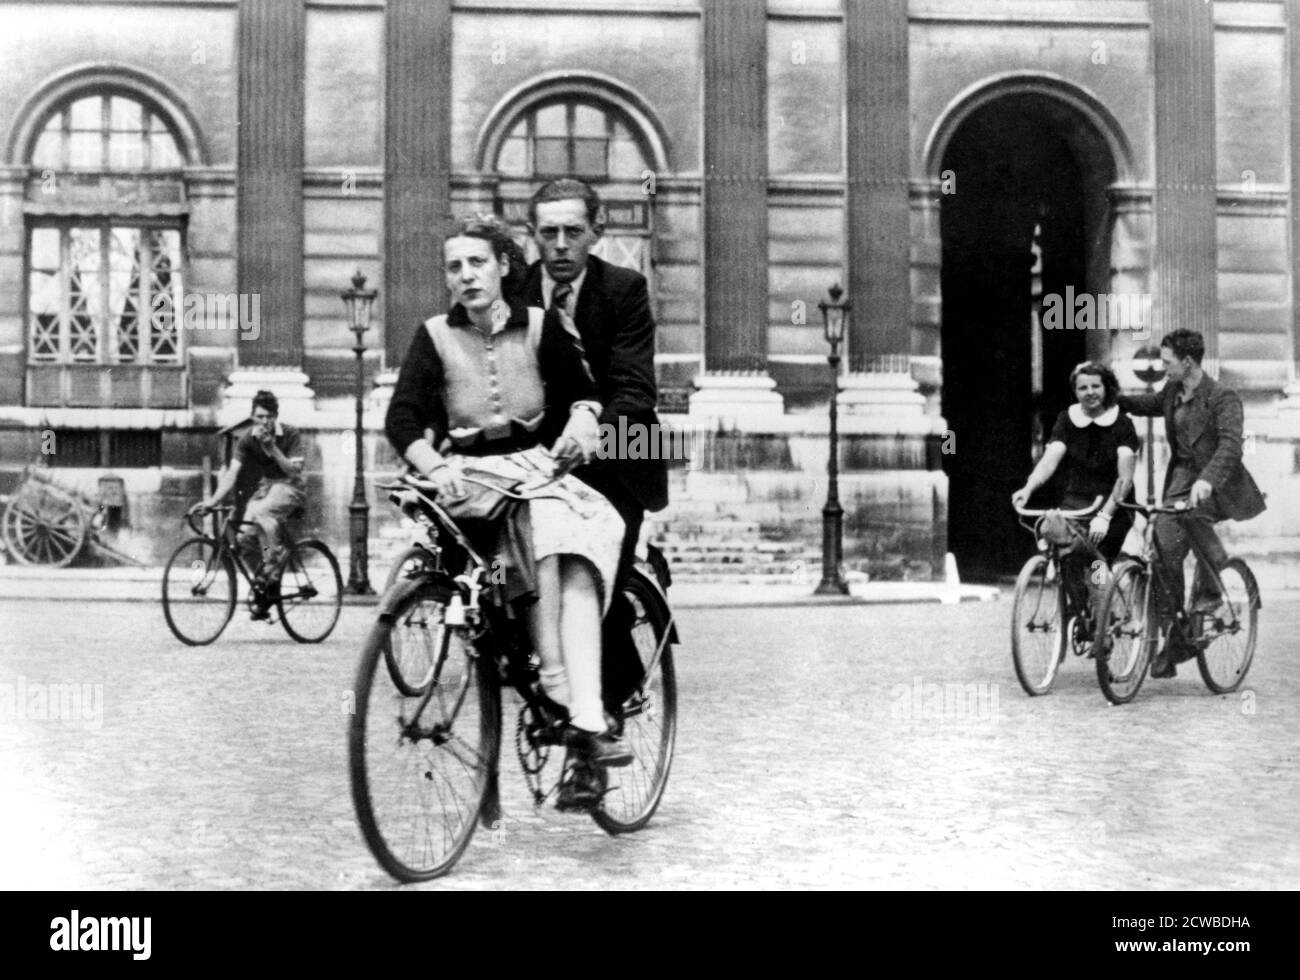 Parisians travelling by bicycle, German-occupied Paris, July 1940. Under the German occupation, petrol was unobtainable. Only police cars and vehicles carrying food supplies were allowed to travel. So the bicycle became the principal mode of transport for civilians. The photographer is unknown. Stock Photo